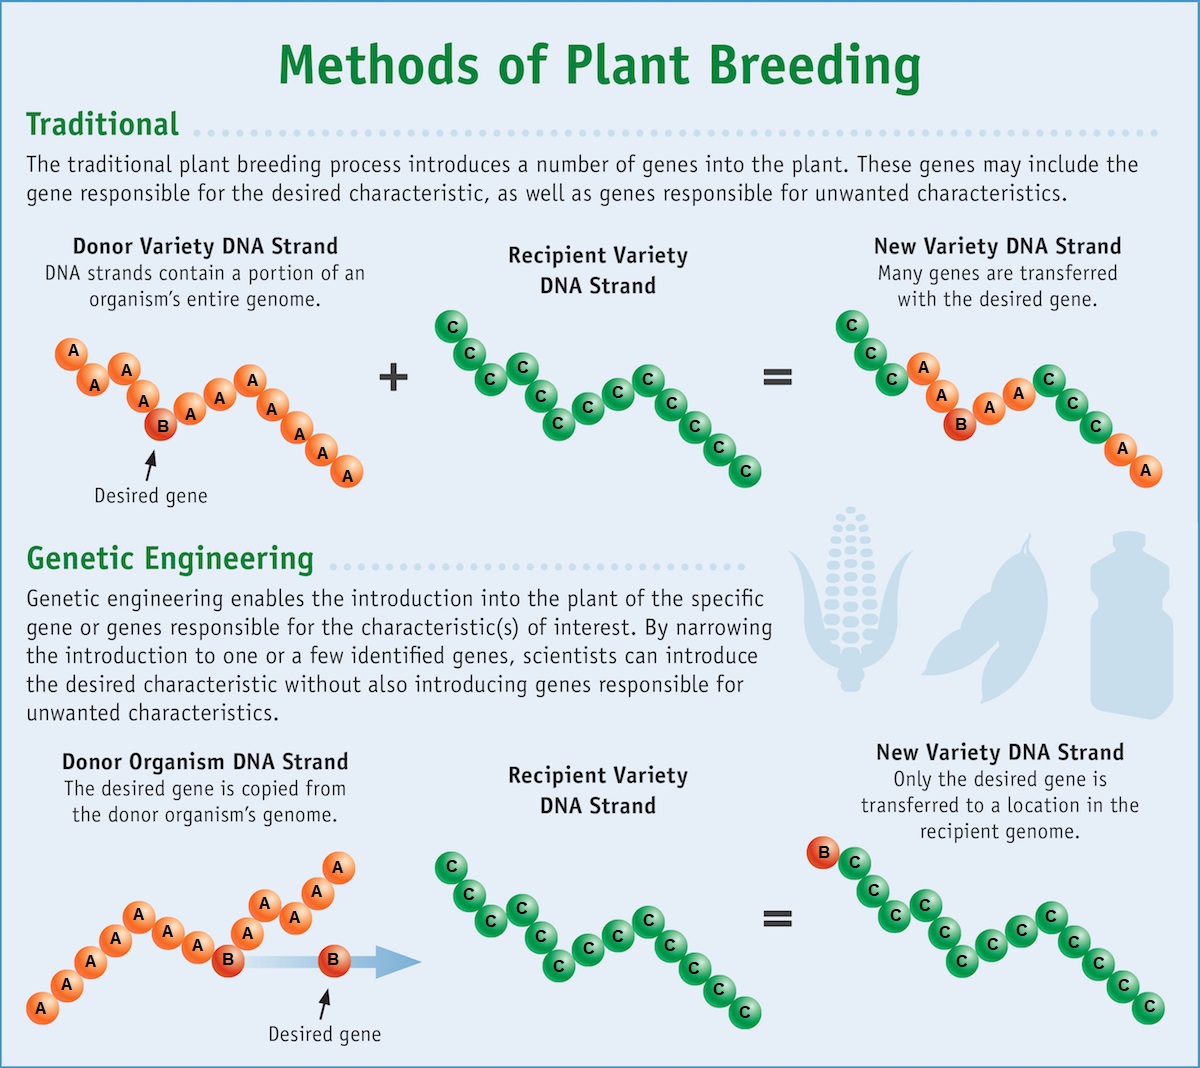 : Selective Breeding and Genetic Engineering - Biology LibreTexts